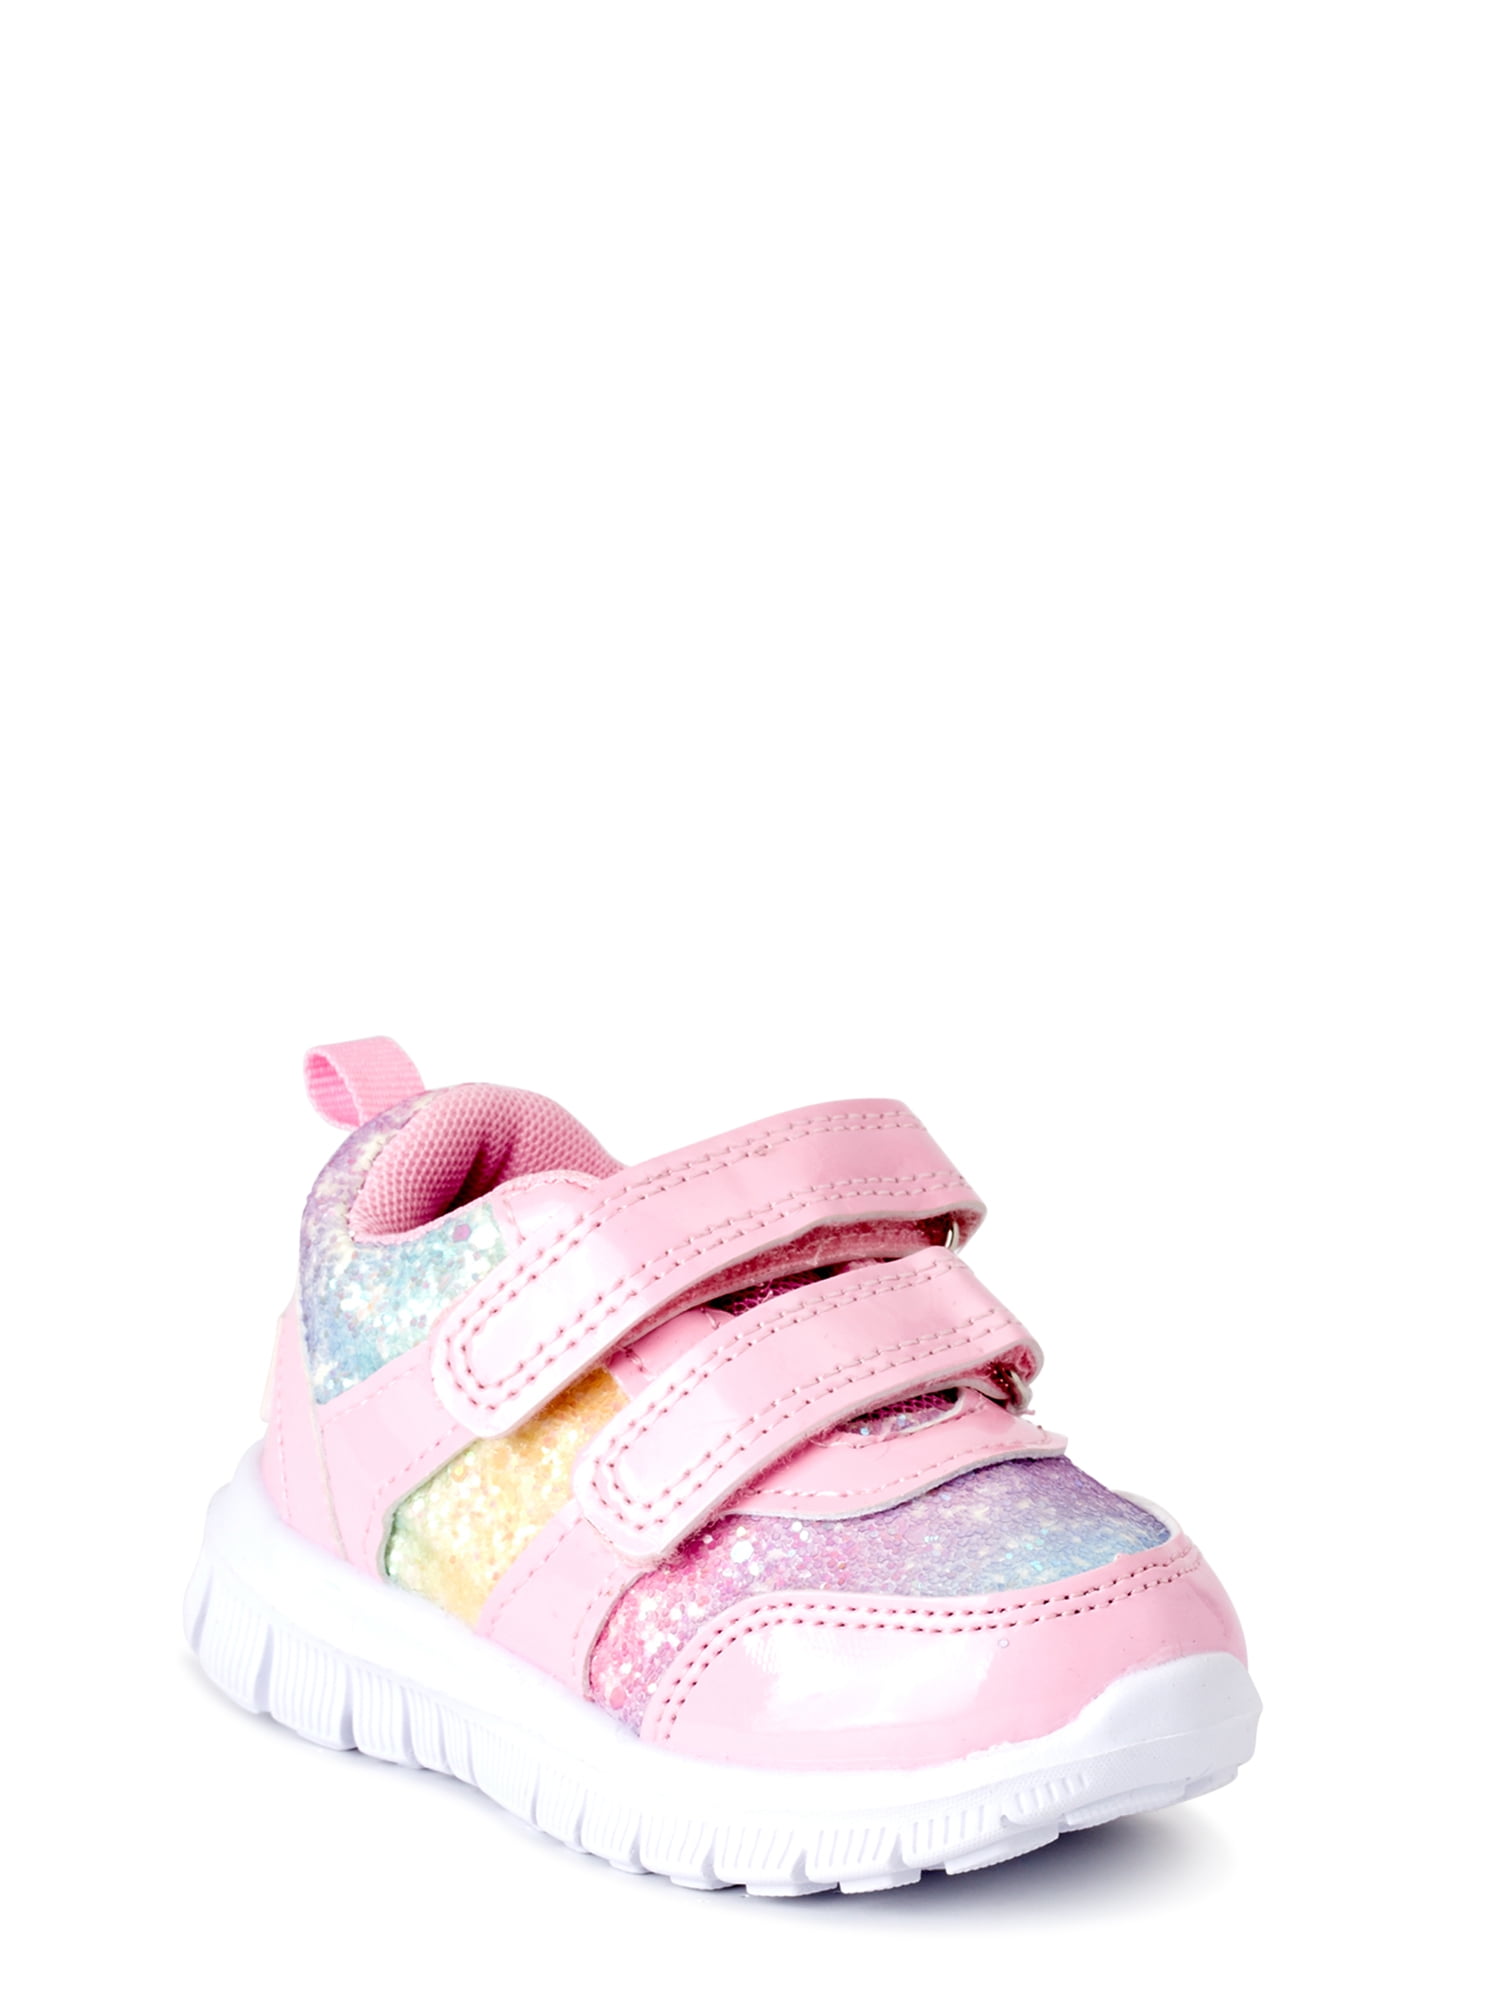 baby girls size 5 shoes